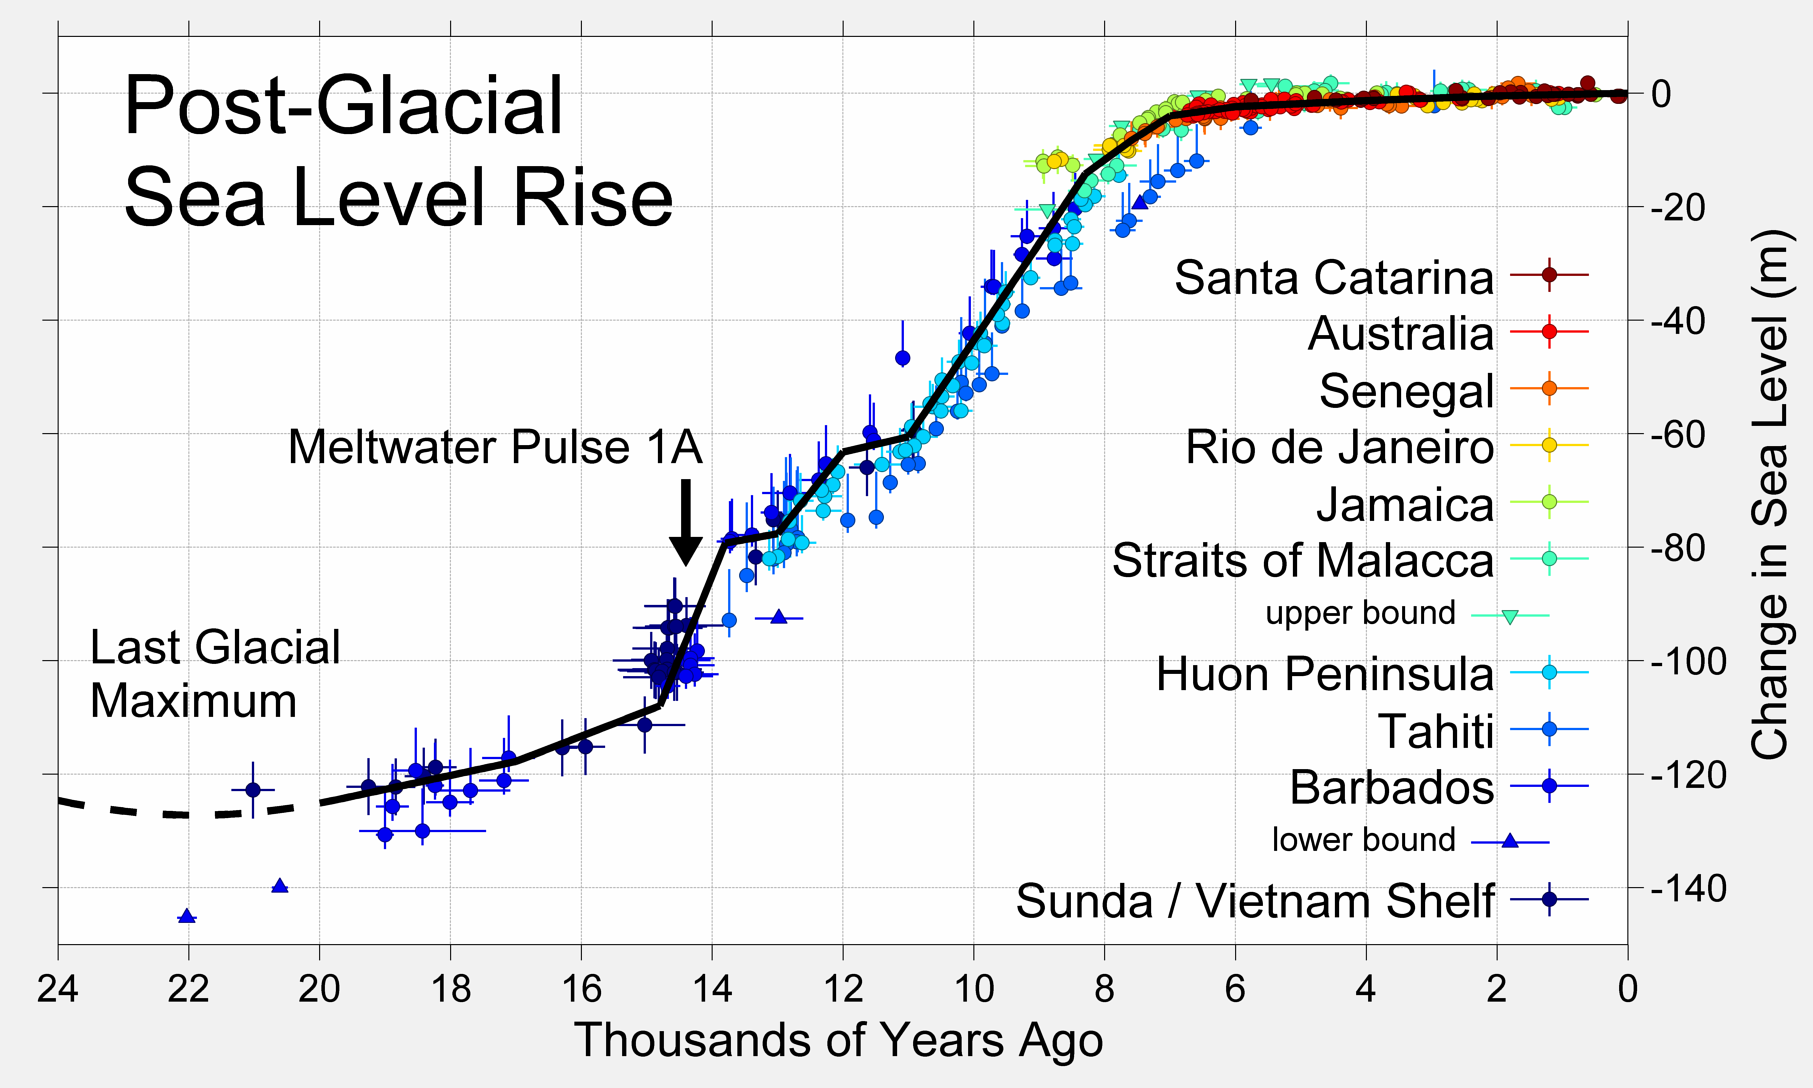 File:Post-Glacial Sea Level.png